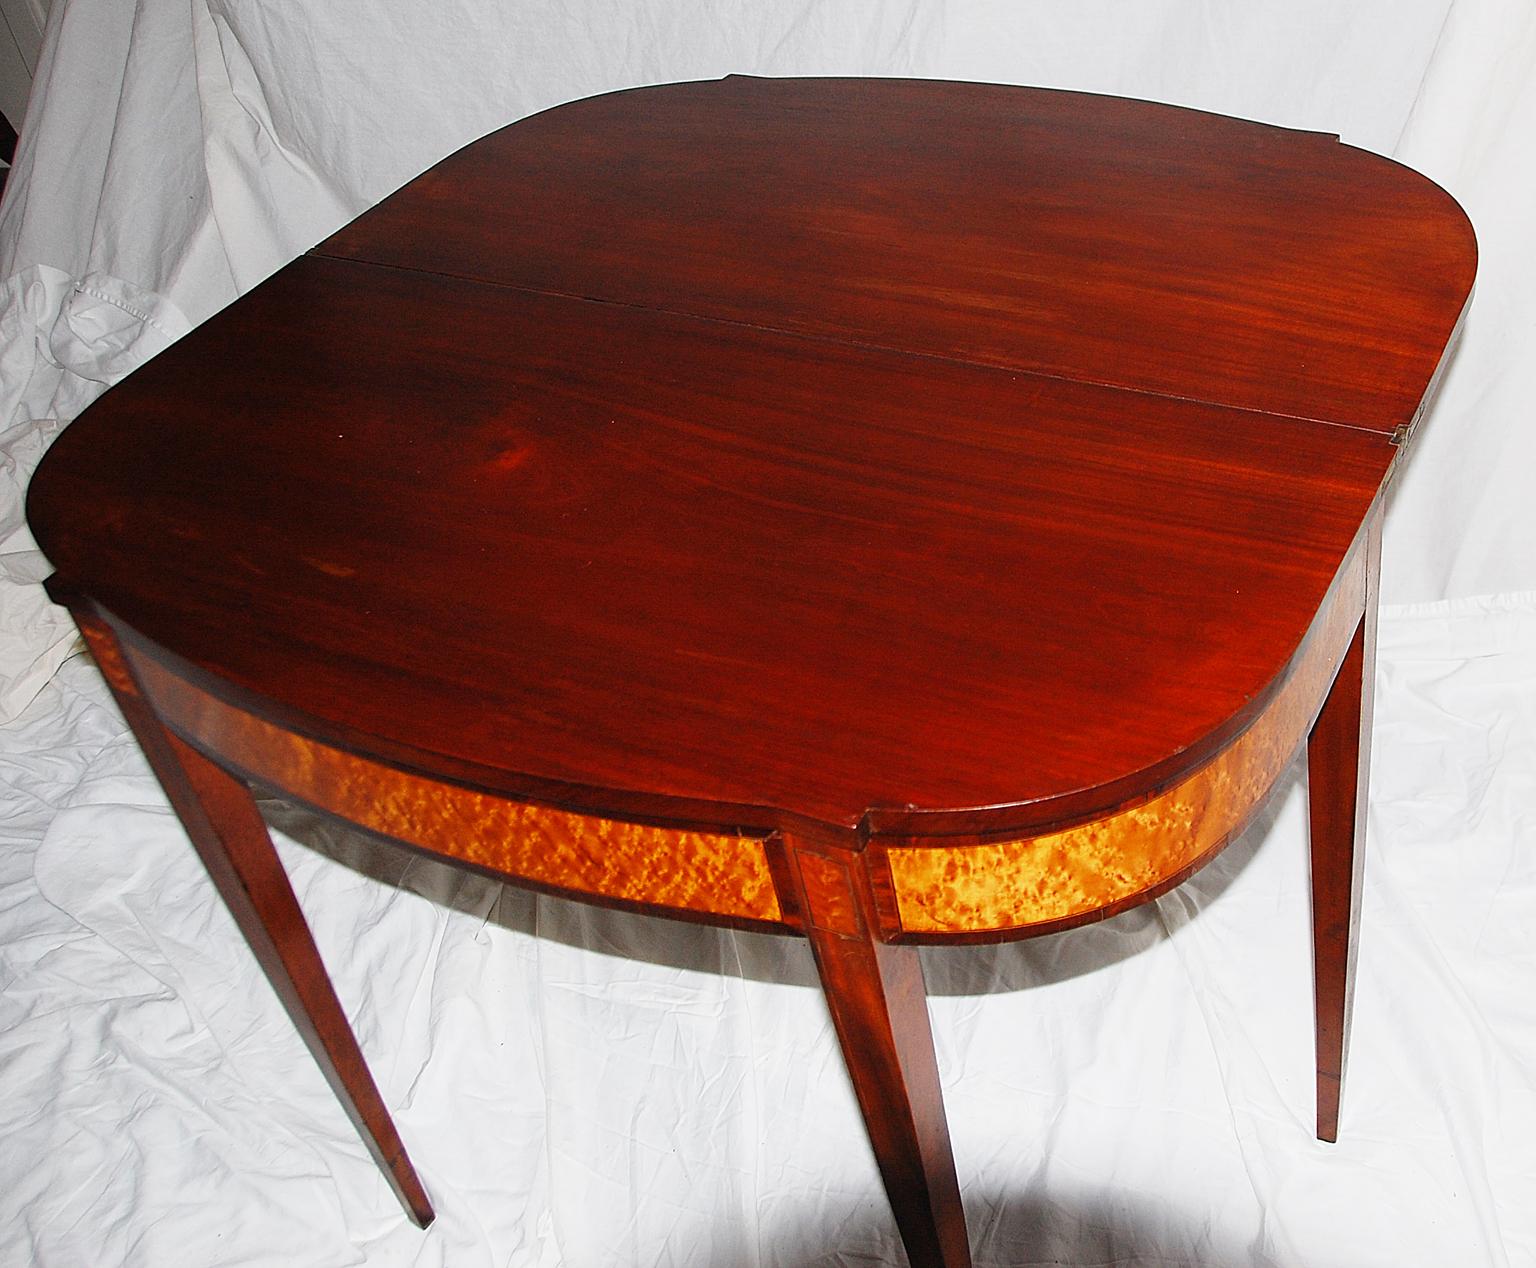 American Federal period Hepplewhite mahogany tea table of New England origin. The breakfront bowfront table is in mahogany with bird's-eye maple panels, ebony and boxwood stringing. One leg swings out to support the table when it is opened, it can